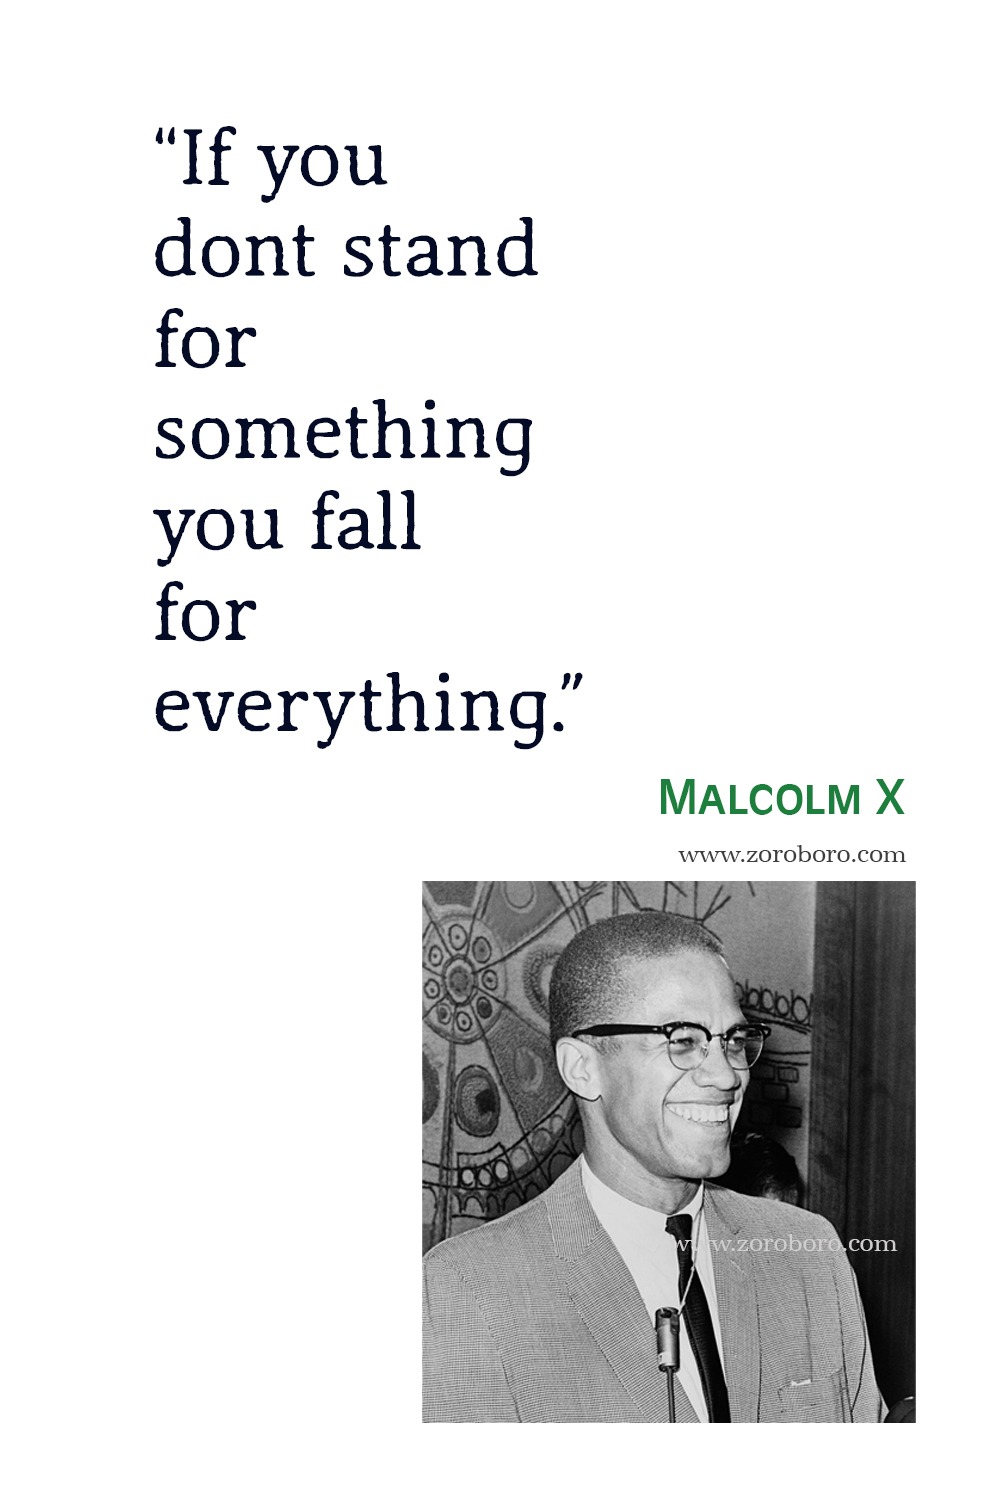 Malcolm X Quotes, The Autobiography of Malcolm X Quotes, Malcolm X Education, Reading, Inspirational, Justice, Respect Quotes. Malcolm X